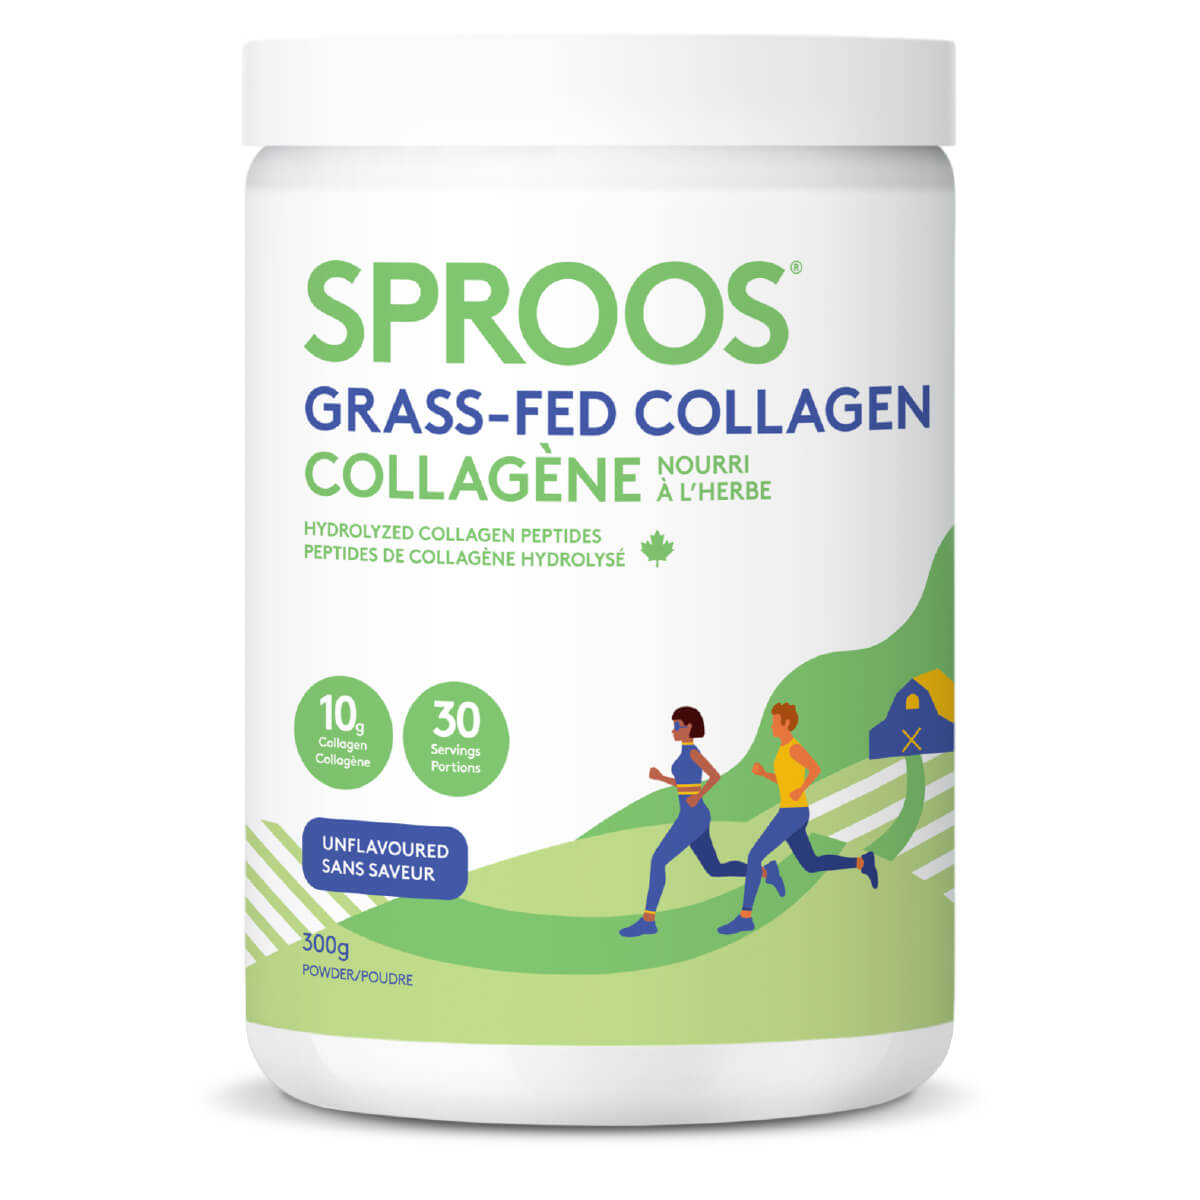 Sproos Grass-Fed Collagen - Tub (300g/30 servings)